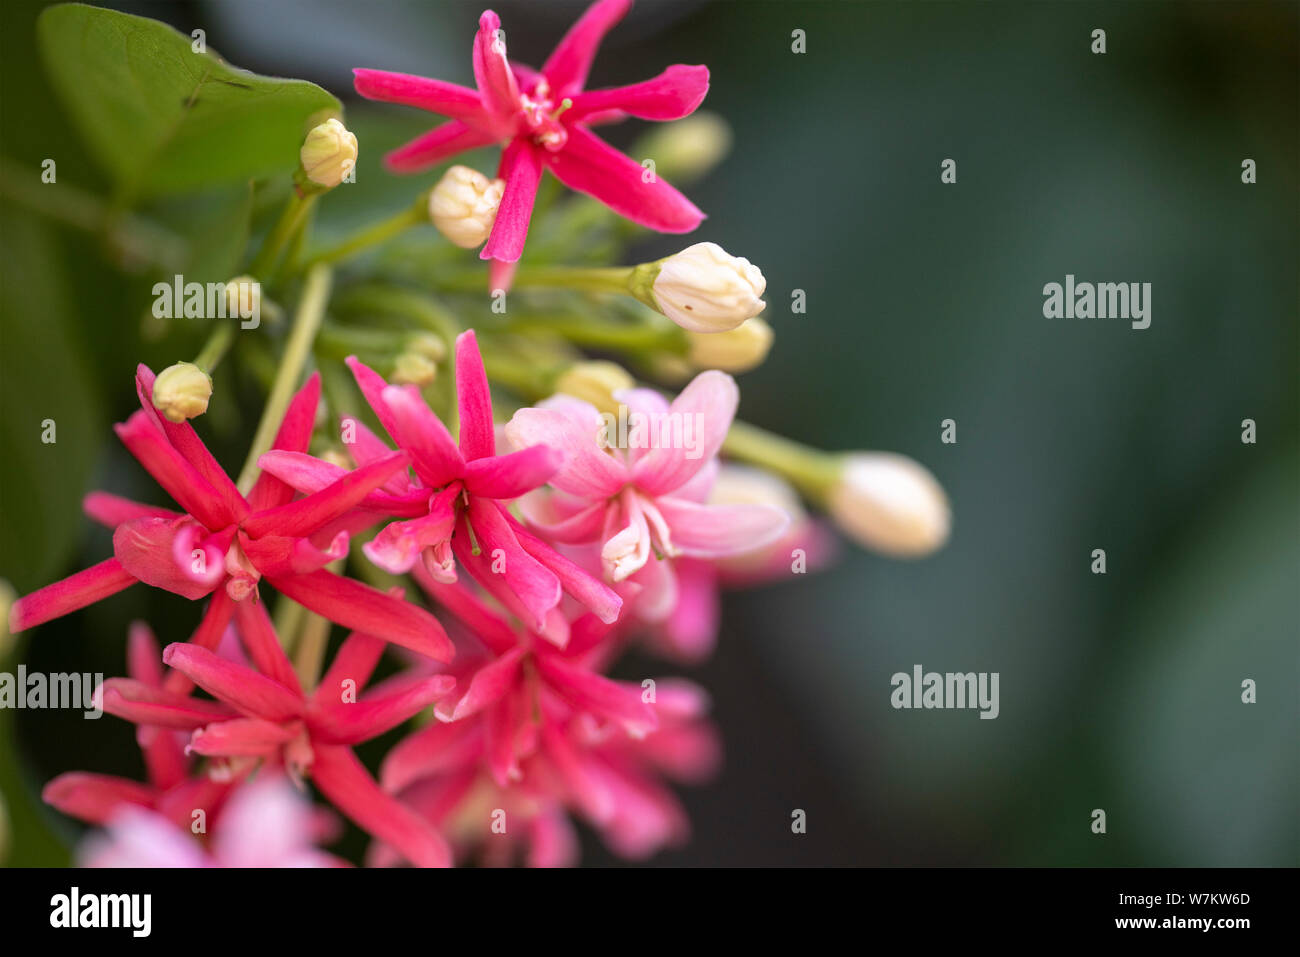 Flowers of the plant Quisqualis indica close-up in natural light. Thailand. Stock Photo